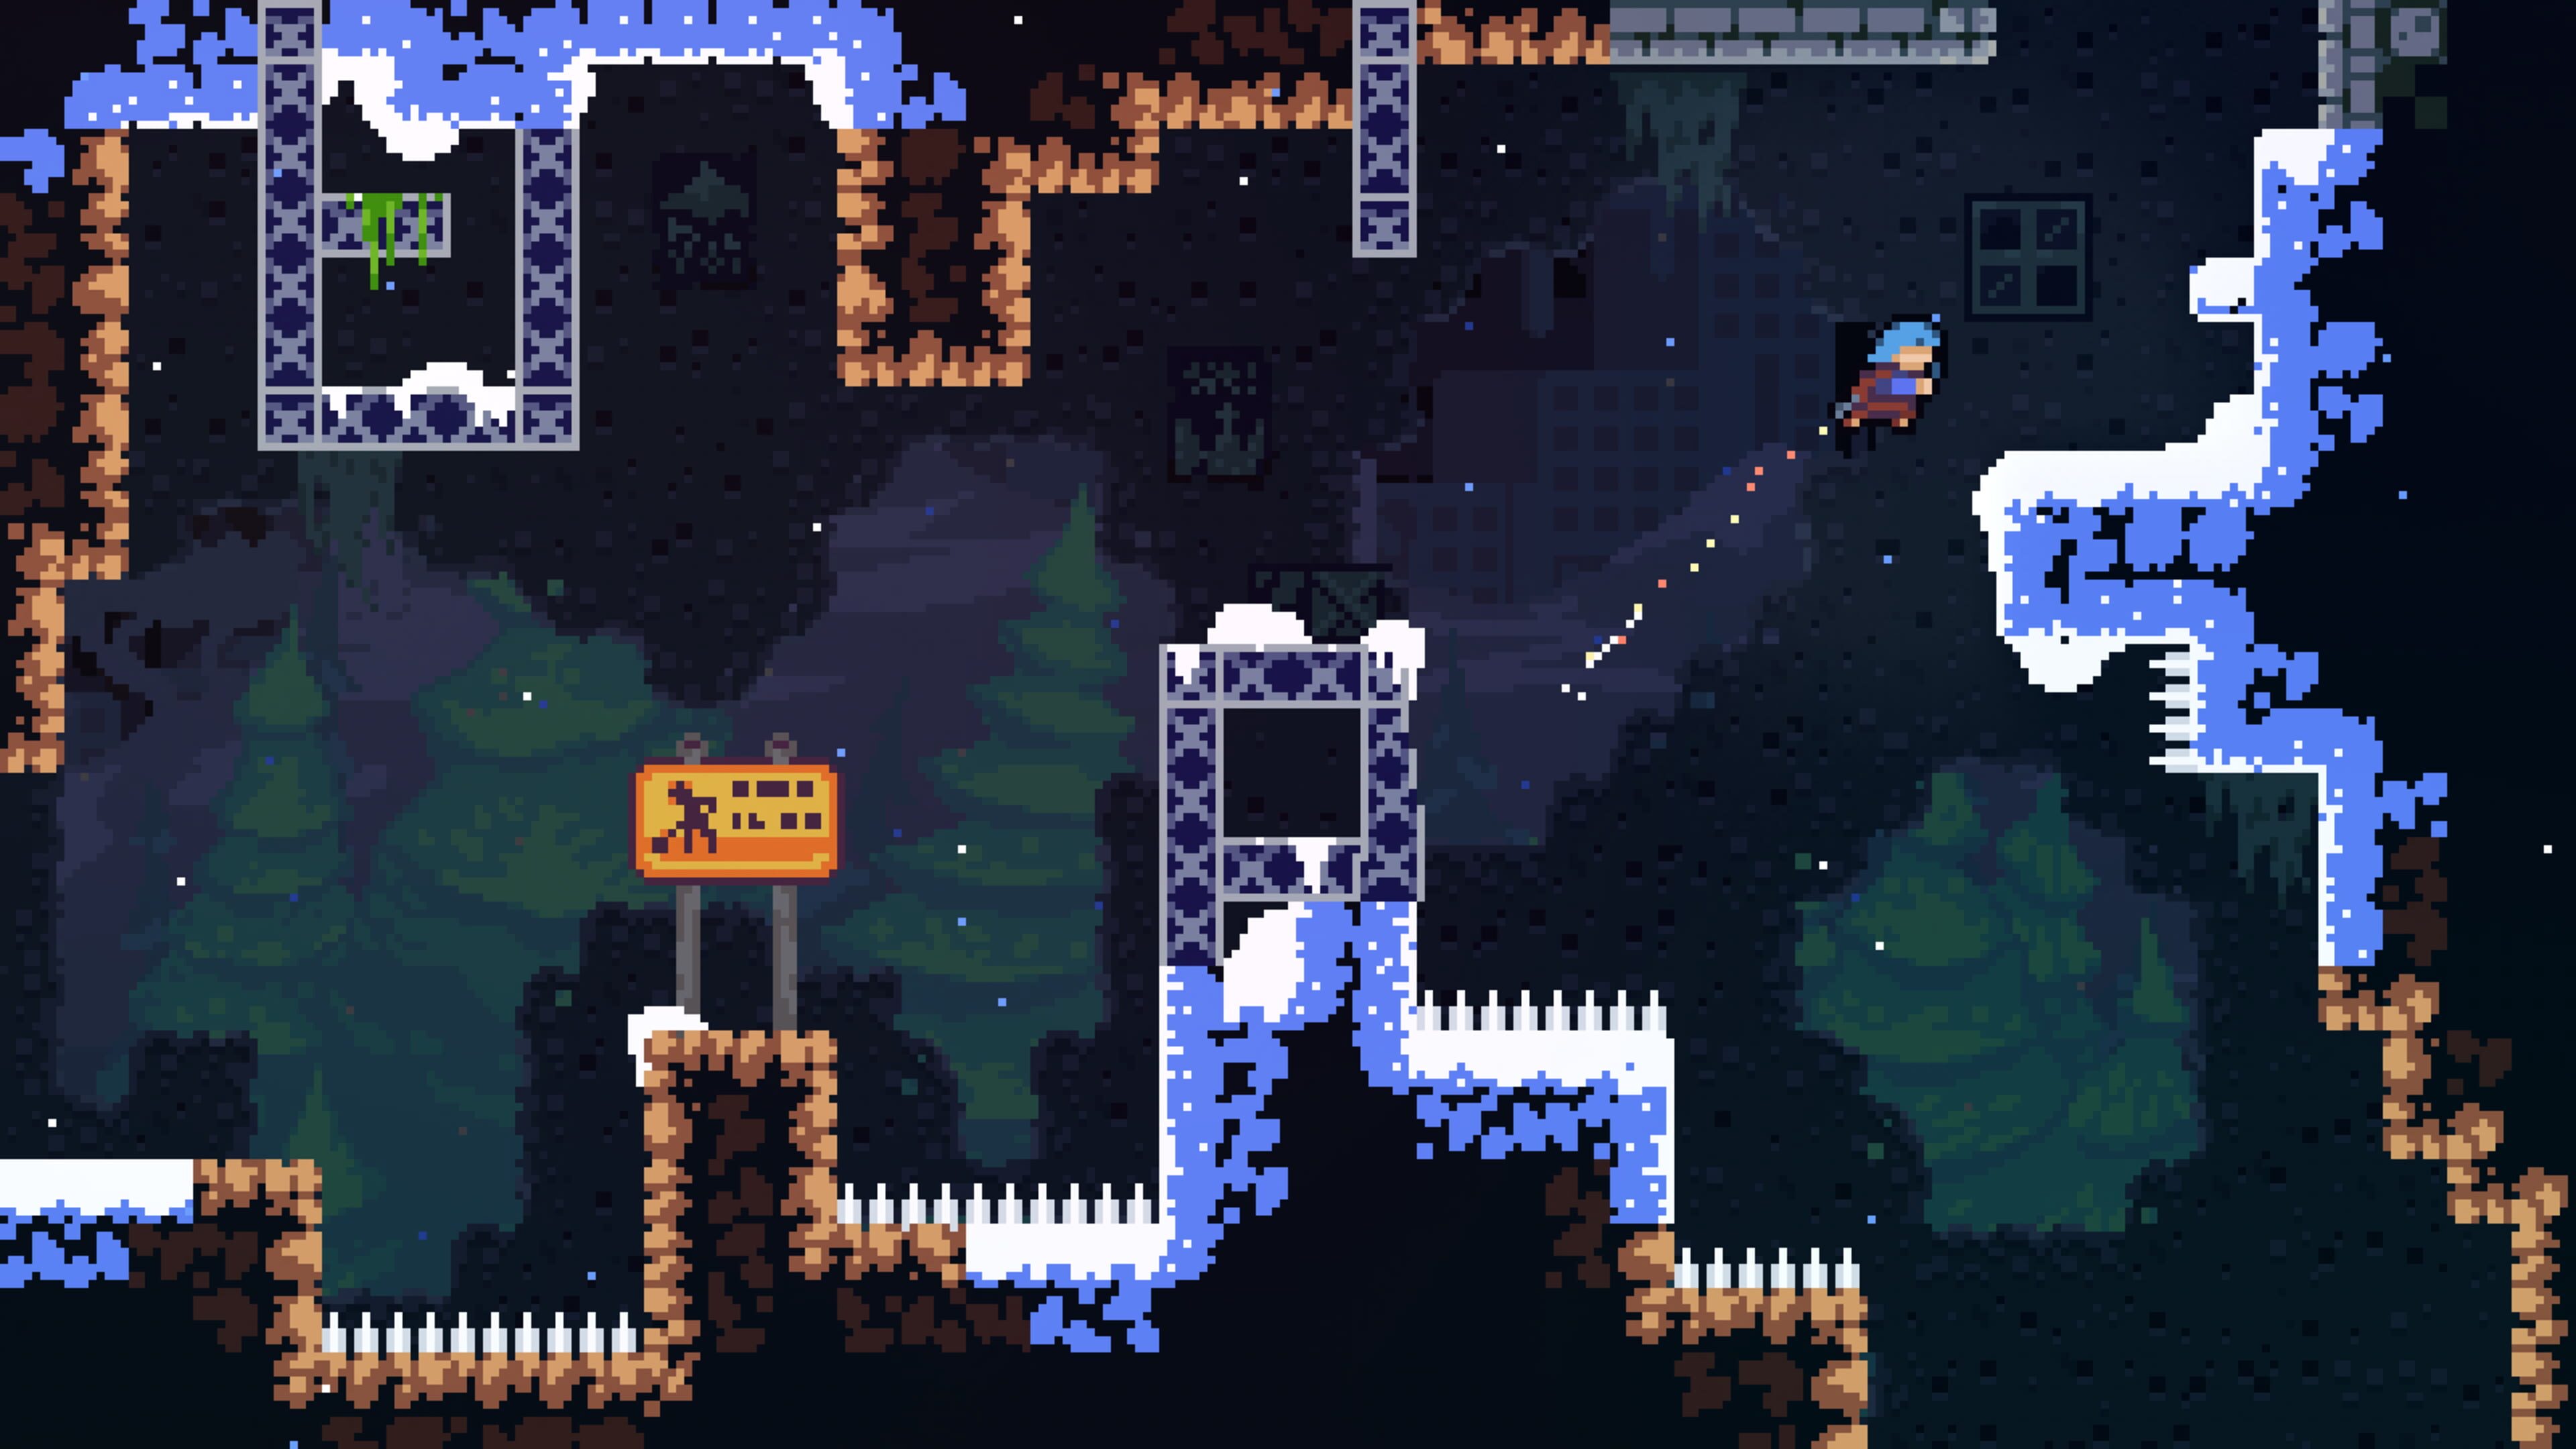 Celeste Collector's Edition Announced by Limited Run Games - GameRevolution